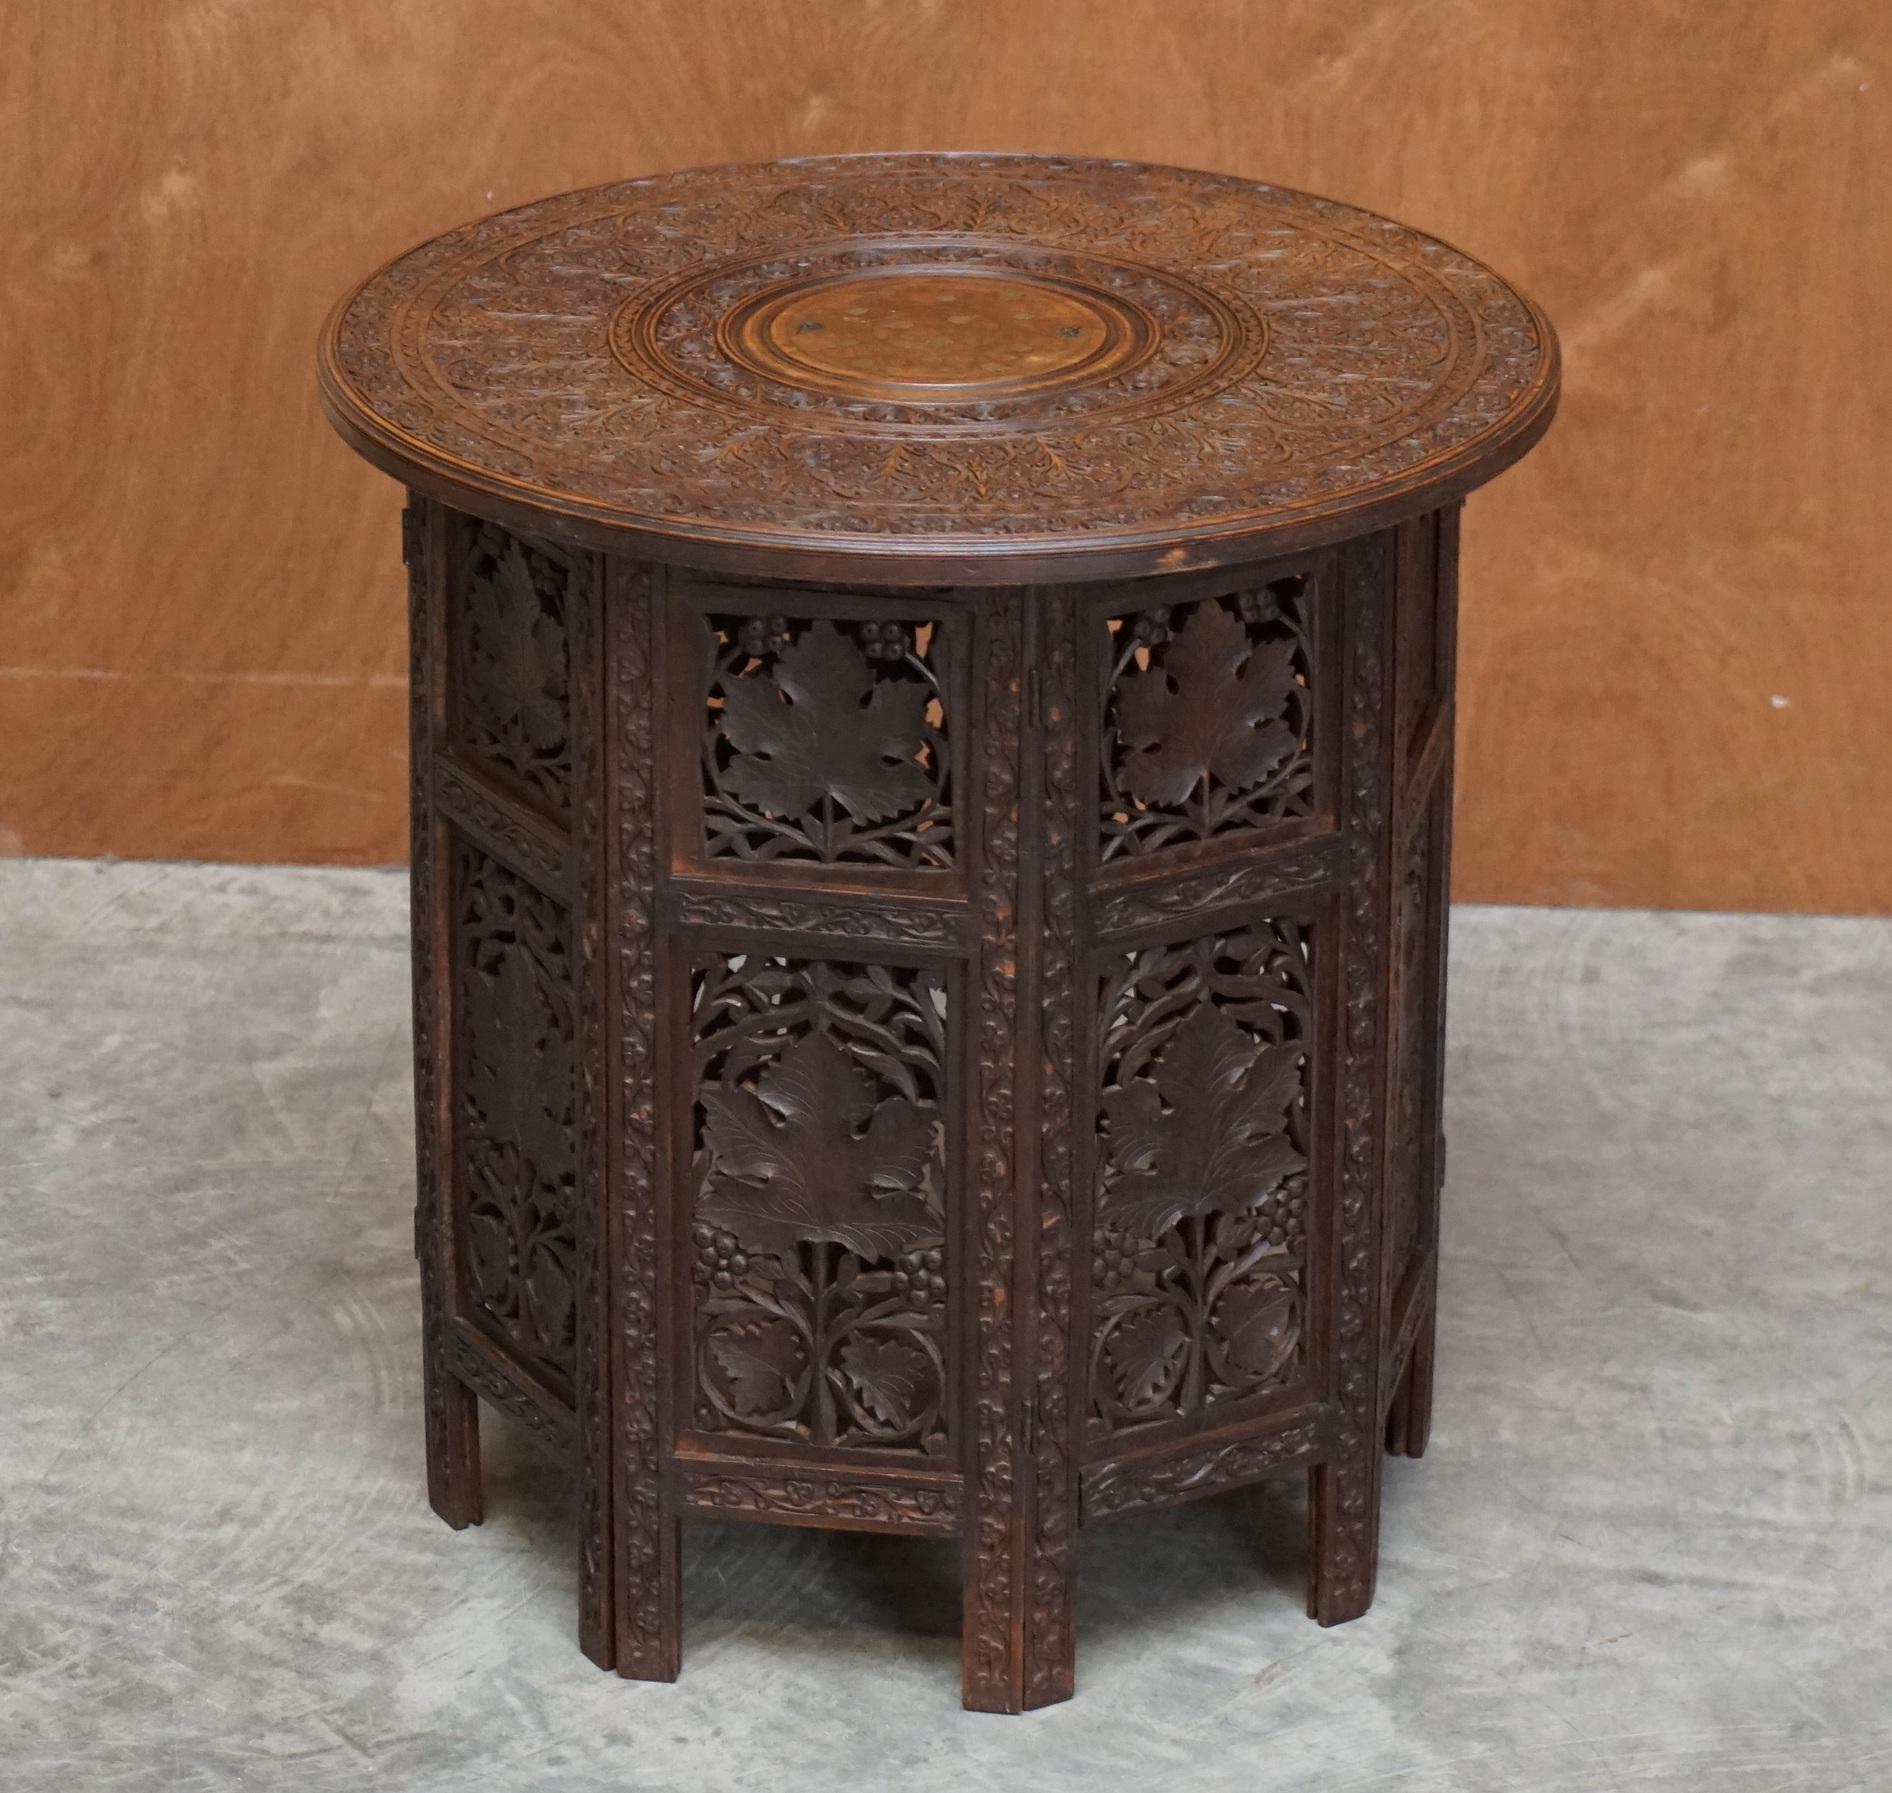 We are delighted to offer for sale this lovely and rare Syrian hand carved folding table retailed through Liberty's London circa 1880

This piece is a good sized decorative table, ideally suited simply for decoration or as a lamp table, the timber